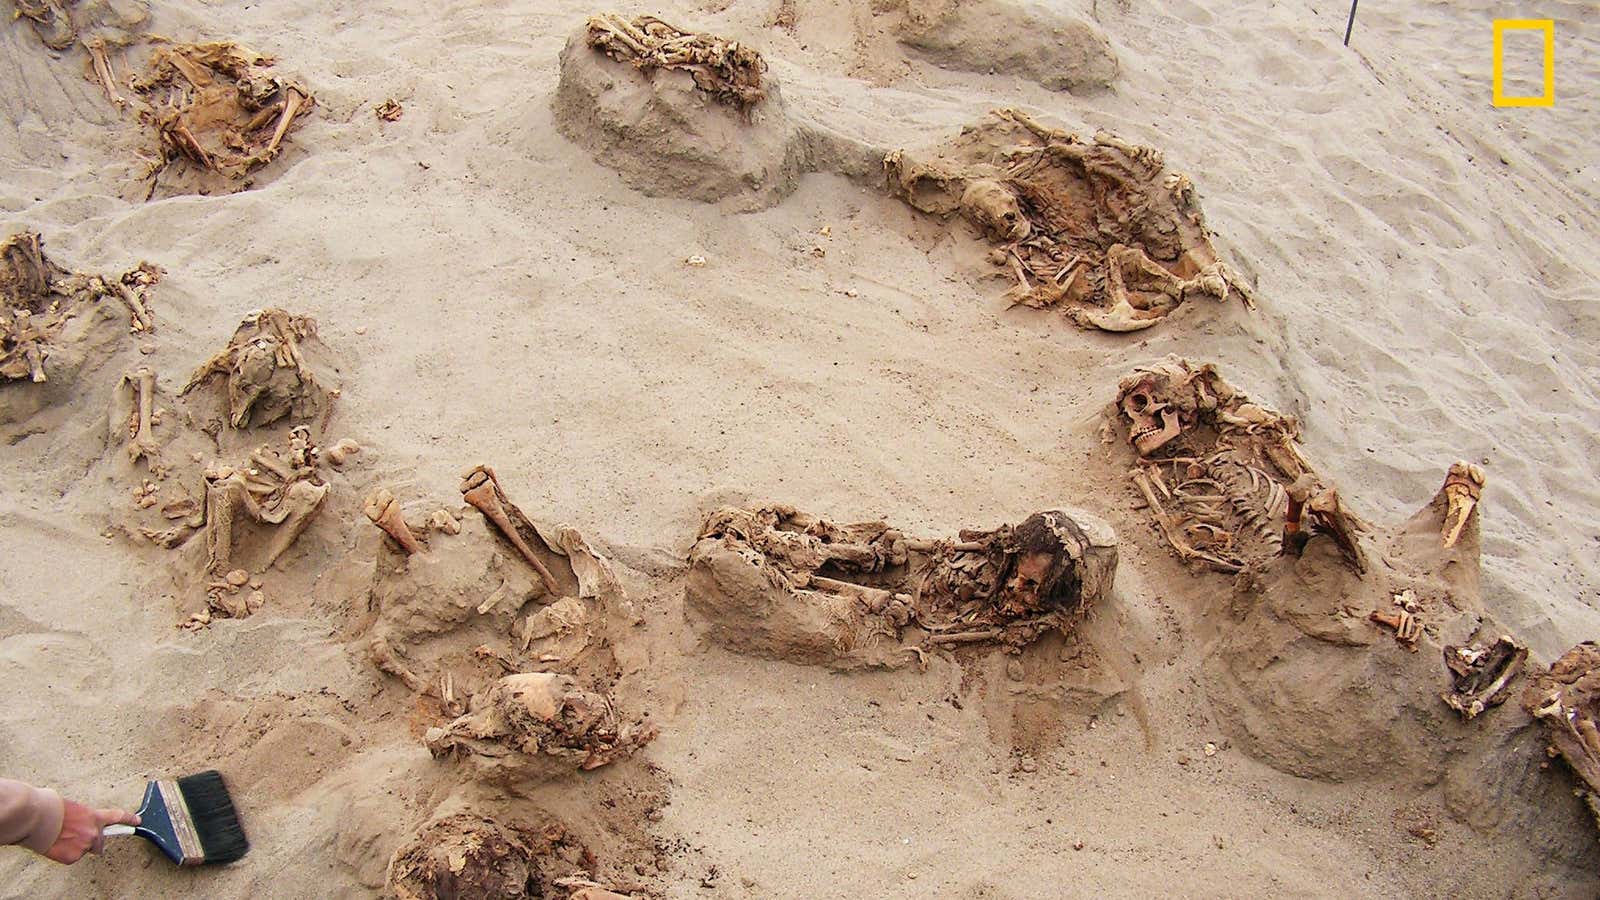 Preserved in dry sand for more than 500 years, more than a dozen bodies are revealed by the hands of archaeologists.